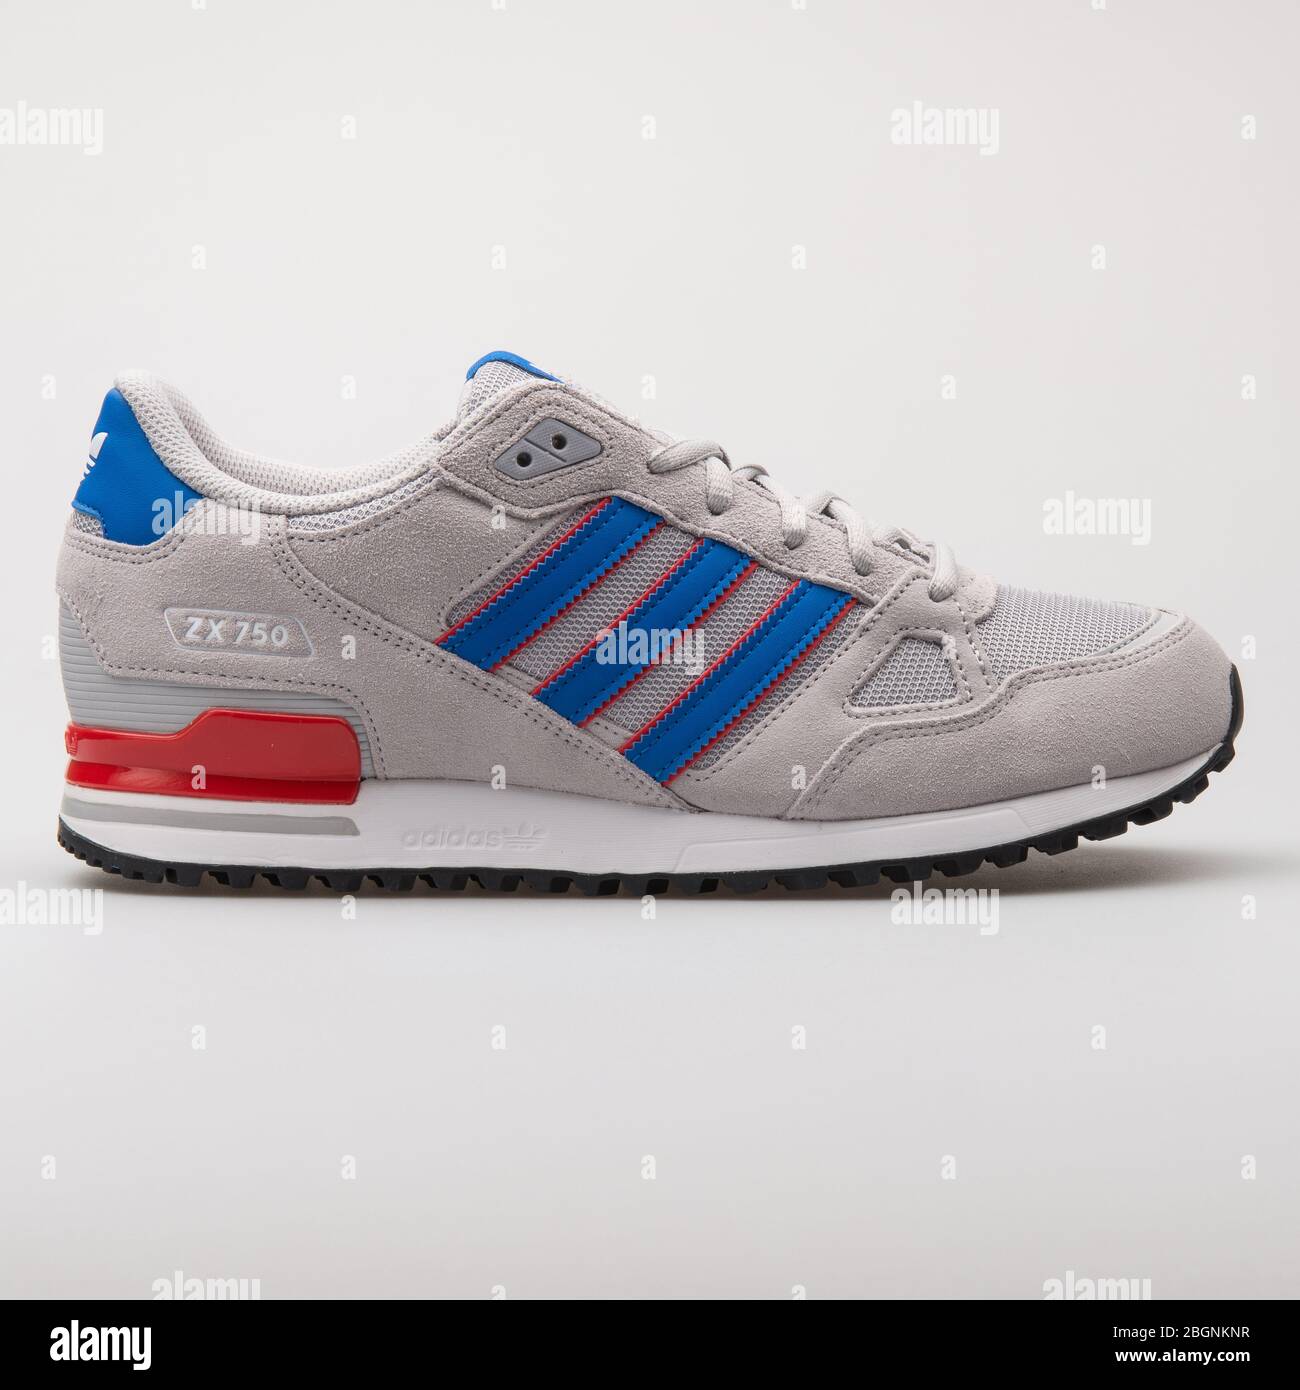 VIENNA, AUSTRIA - AUGUST 6, 2017: Adidas ZX 750 grey, blue and red sneaker  on white background Stock Photo - Alamy